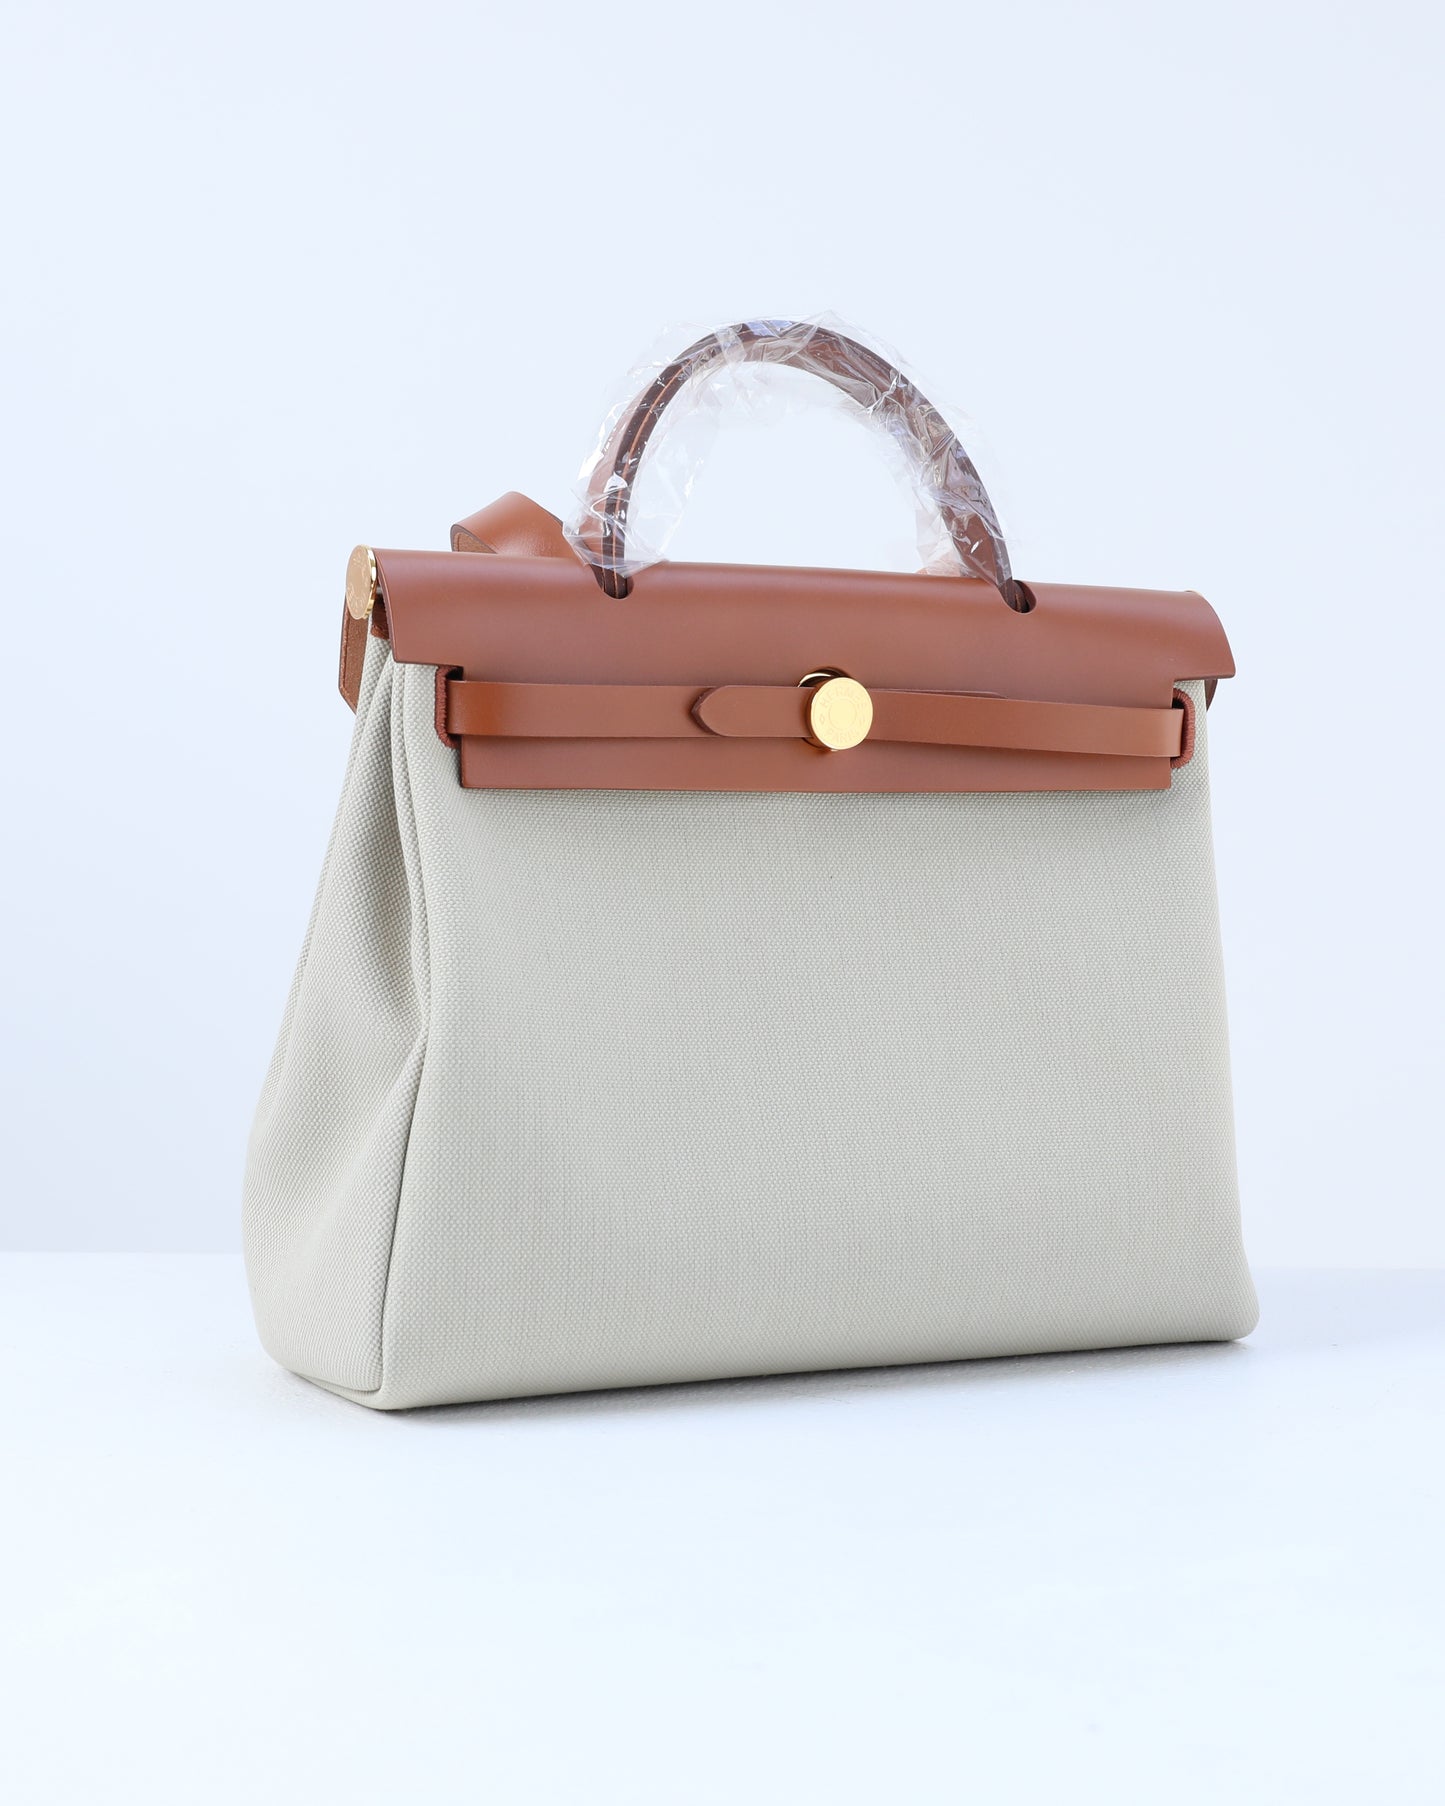 Herbag Zip 31 in Tan Vache Hunter and Beton Toile with Gold Hardware